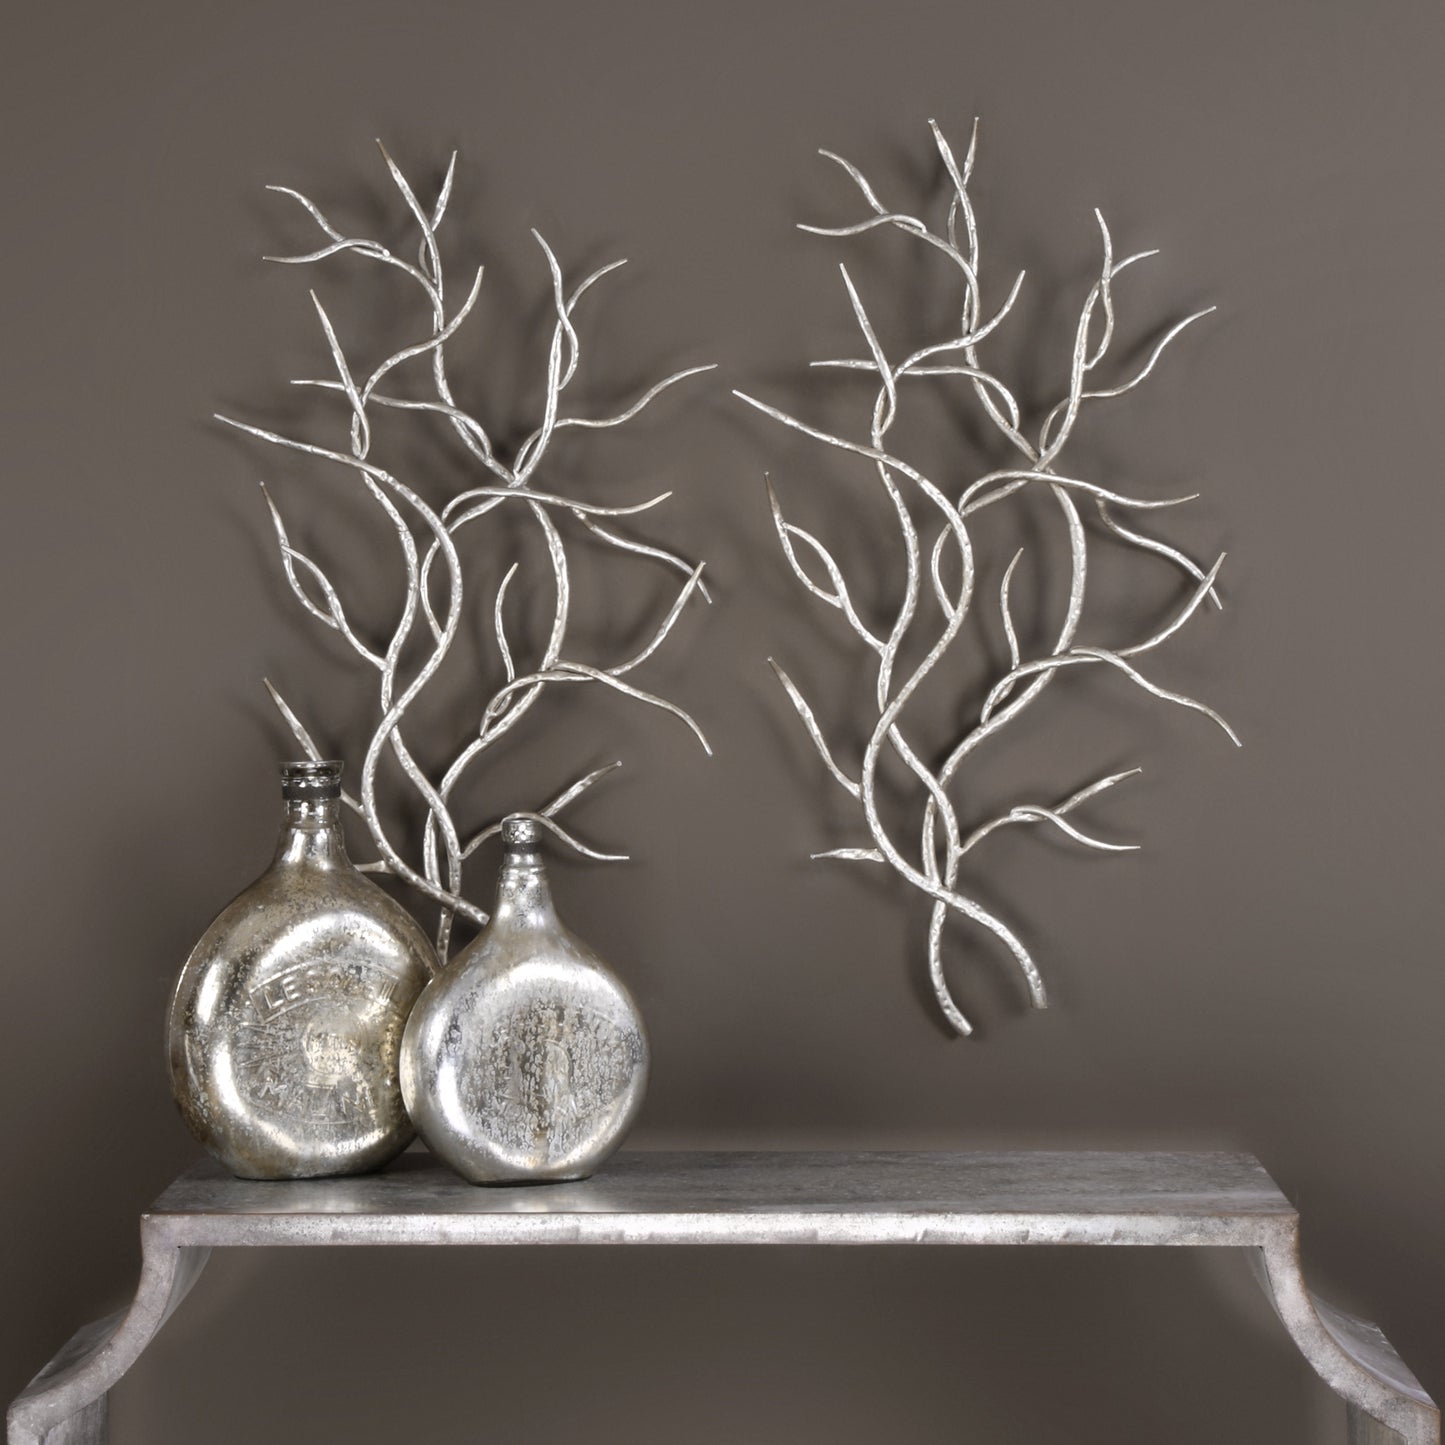 Uttermost Silver Branches Wall Art S/2